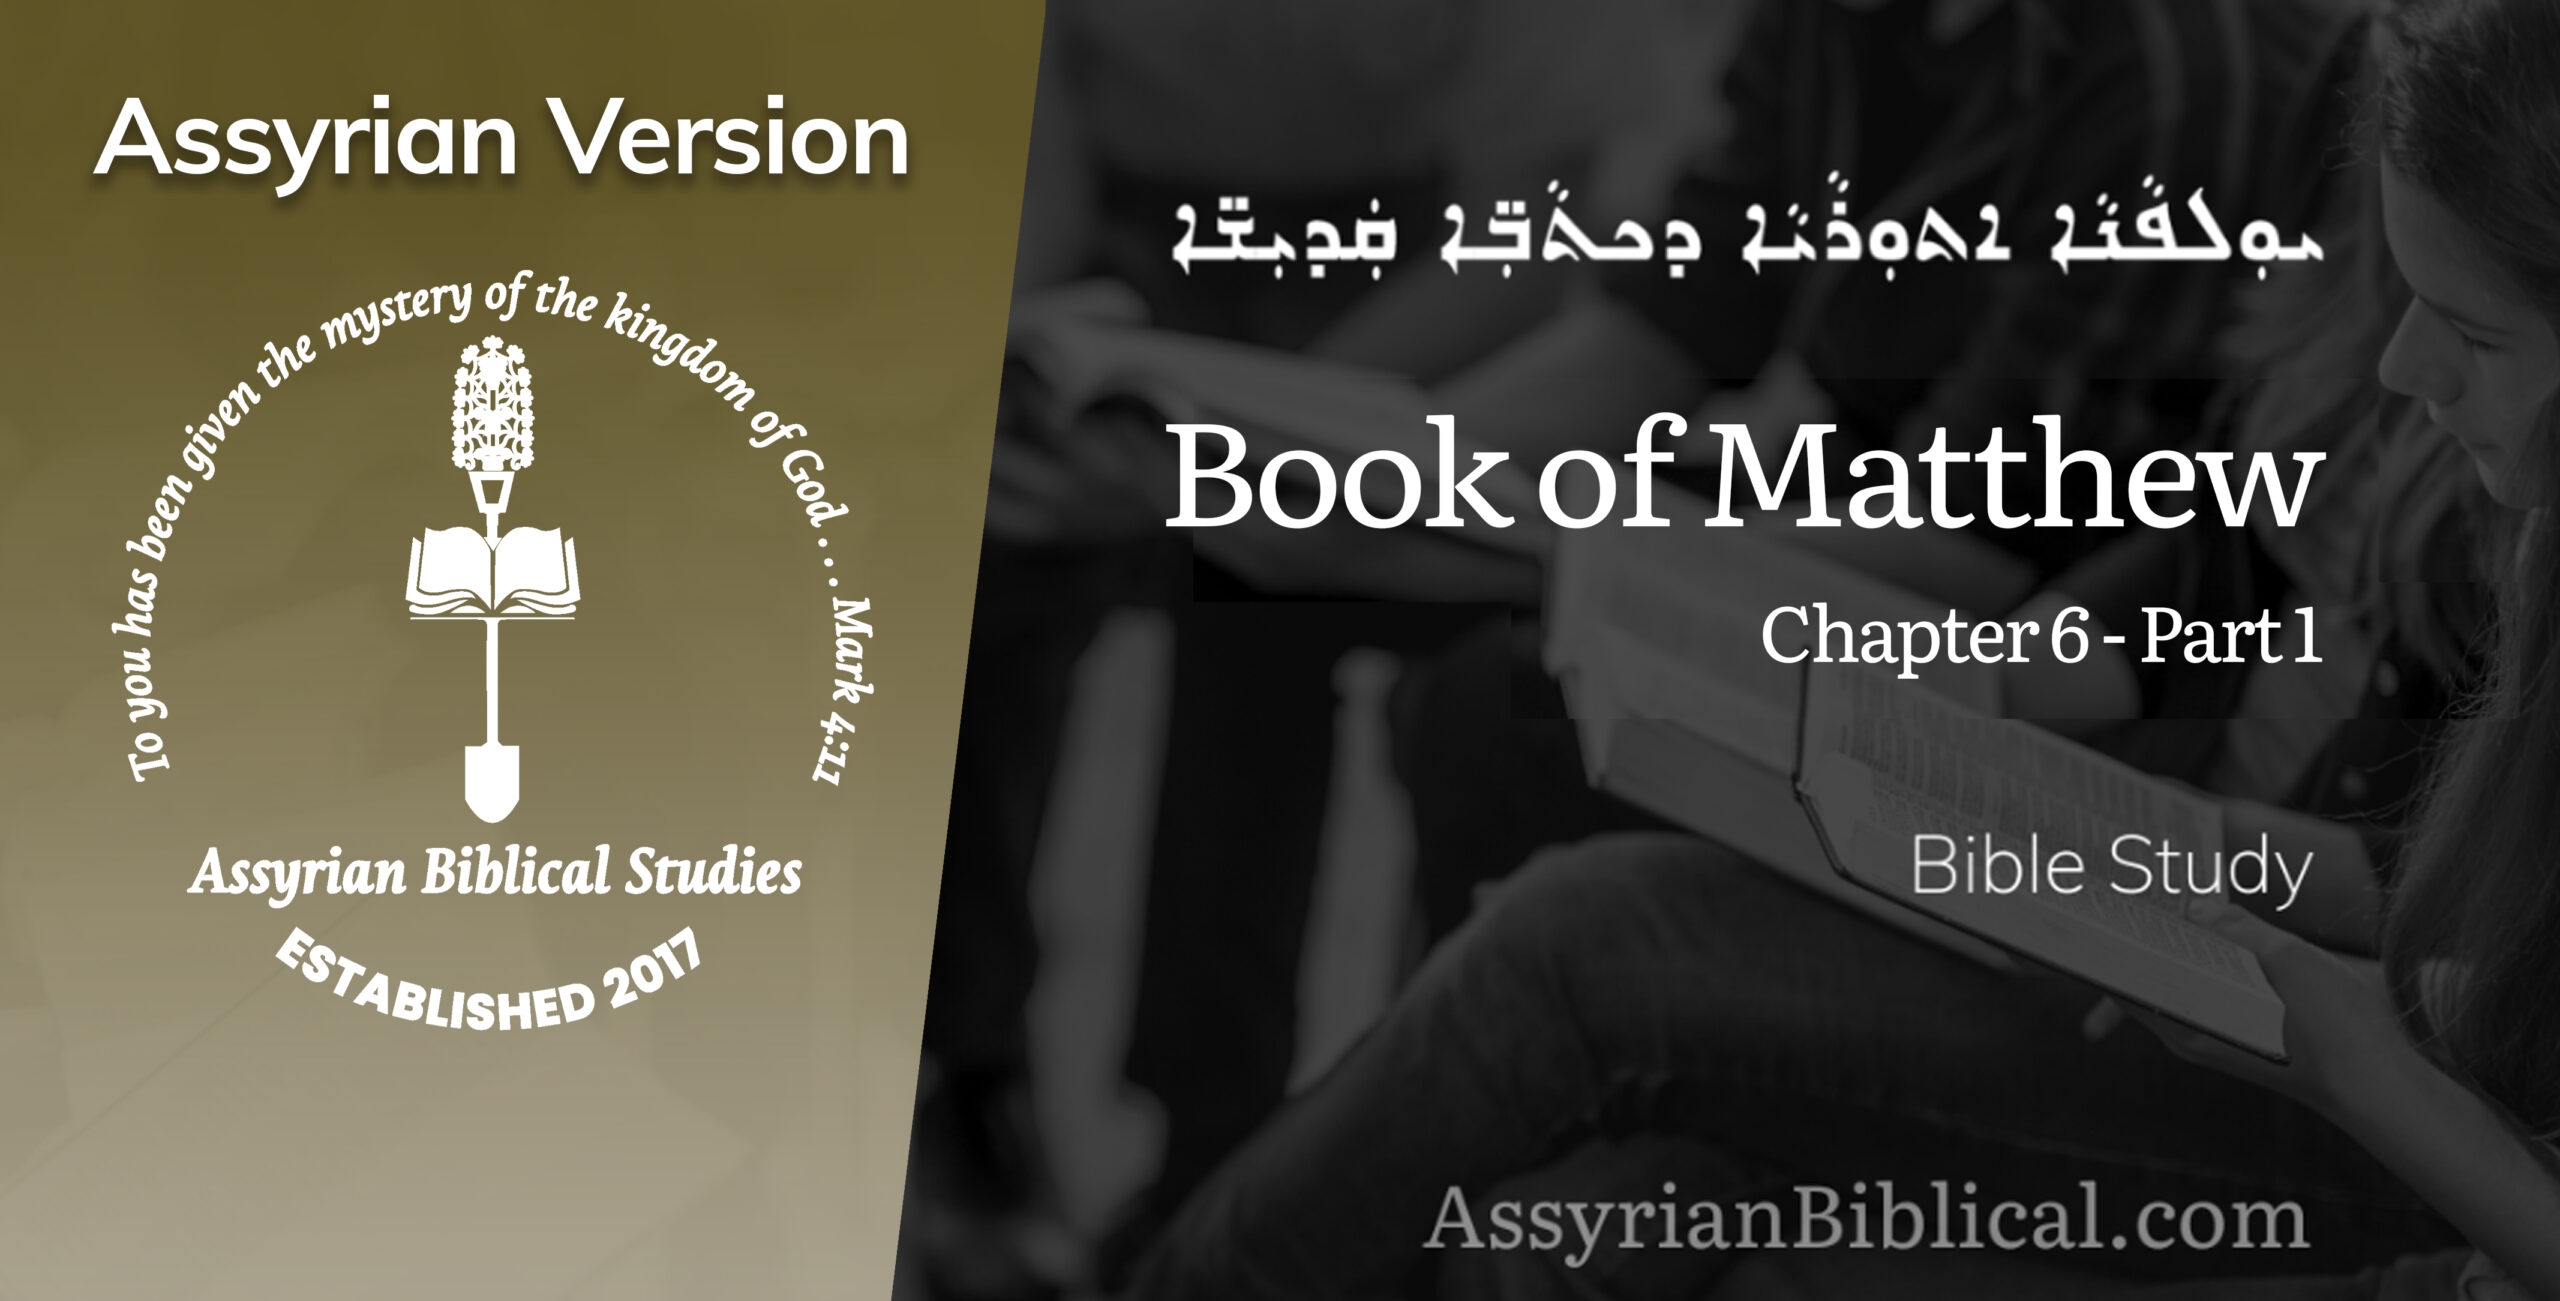 Image of video thumbnail for Book of Mathew Chapter 6 Part 1 in Assyrian